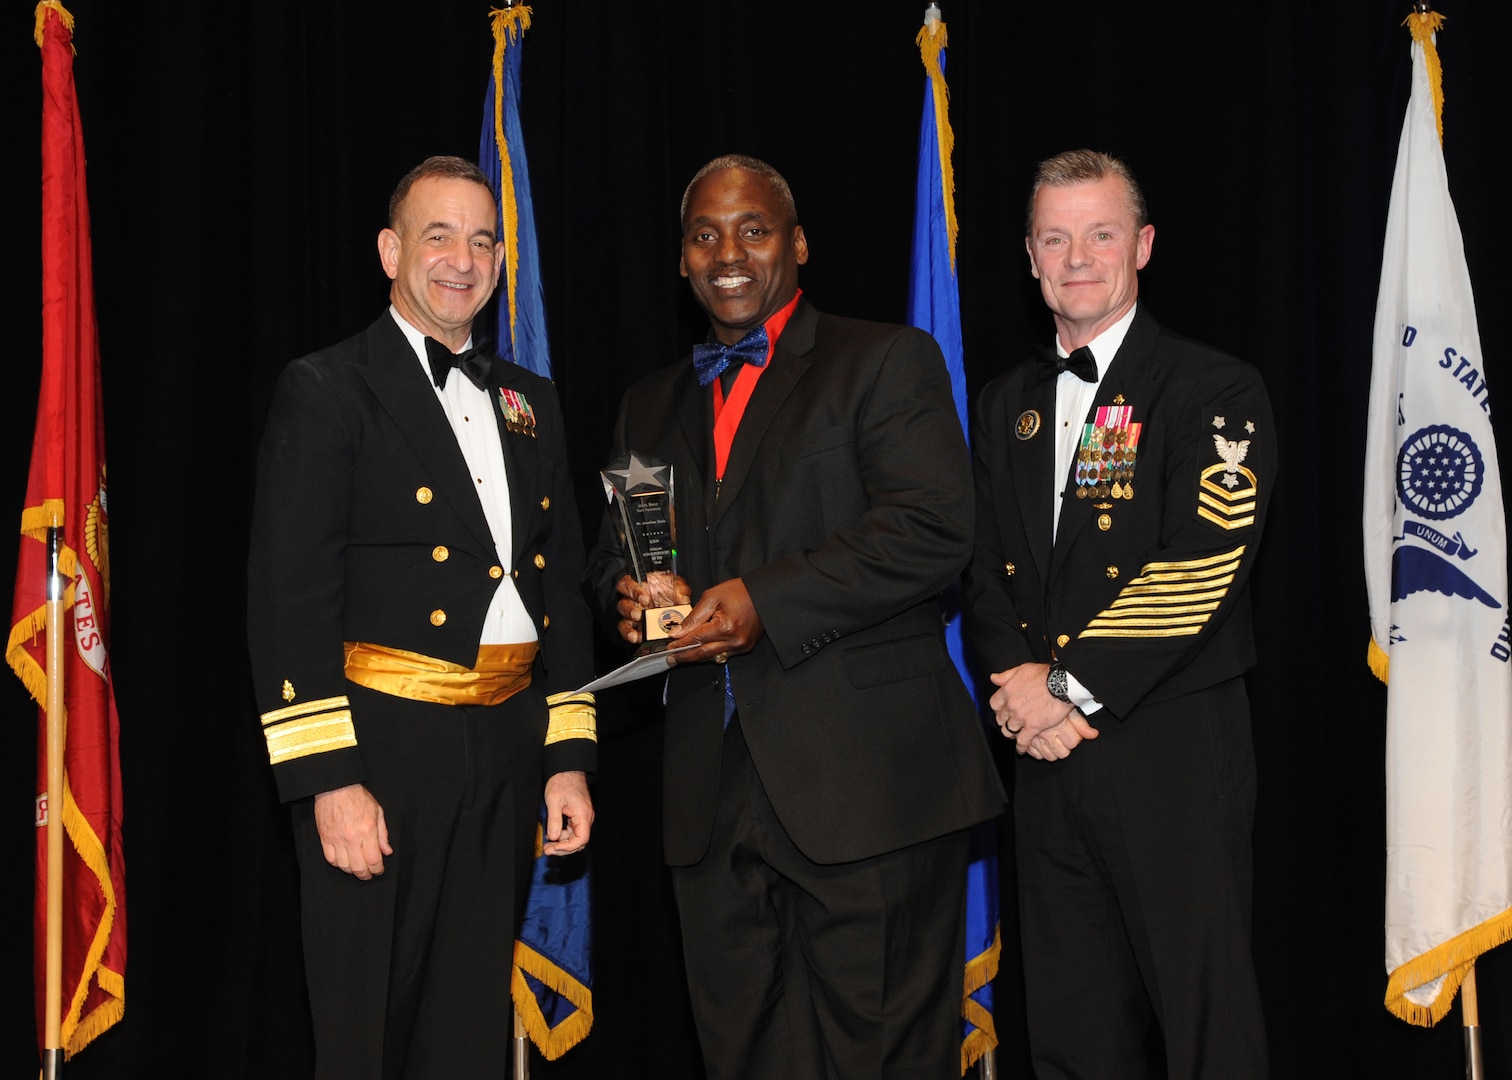 Representing the Navy for award presentations during the Joint Base San Antonio Annual Awards Banquet March 29 are Rear Adm. Bill Roberts, left, and Command Master Chief Petty Officer Christopher Angstead, right. Jonathan Davis, center, from the Navy Medicine Training Support Center, received the Civilian Non-Supervisory Category II of the Year Award.(U.S. Air Force photo by Melissa Peterson)